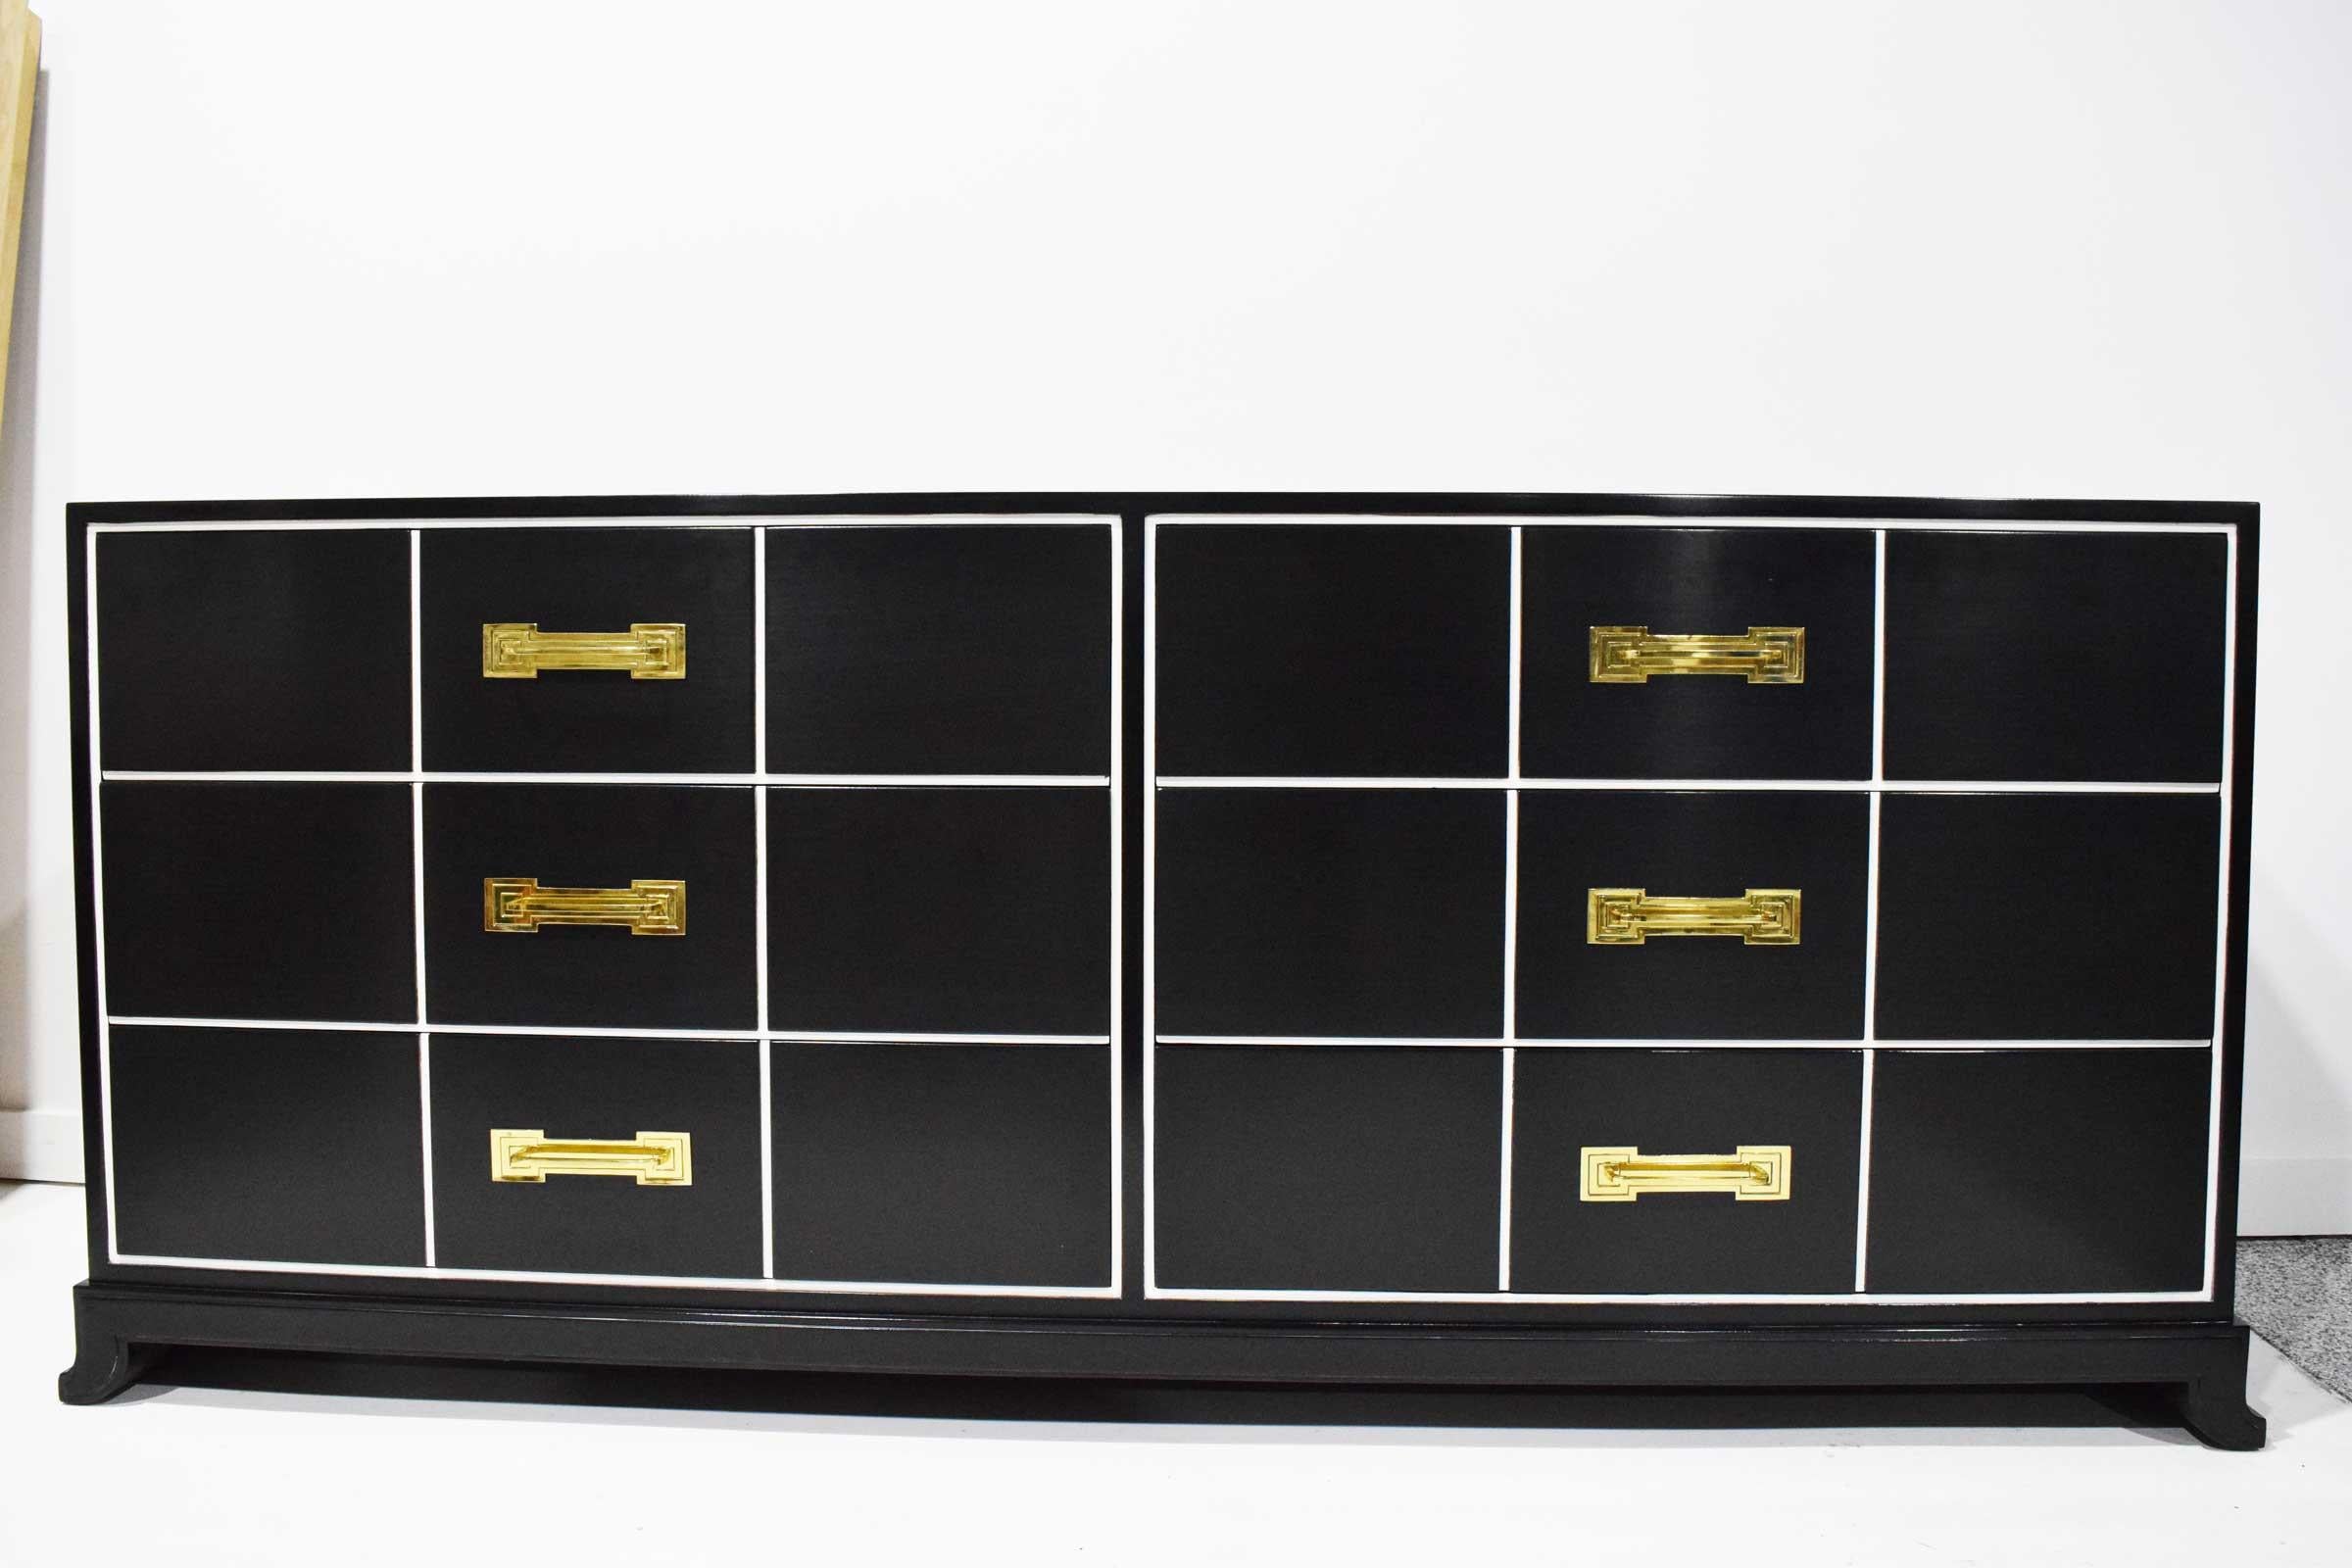 Six-drawer chest, designed by Tommi Parzinger, circa 1948. Produced in Boston, Massachusetts by Charak Furniture Company. Charak, was at one point, one of the finest furniture makers in the country. This cabinet is lacquered in high gloss black with